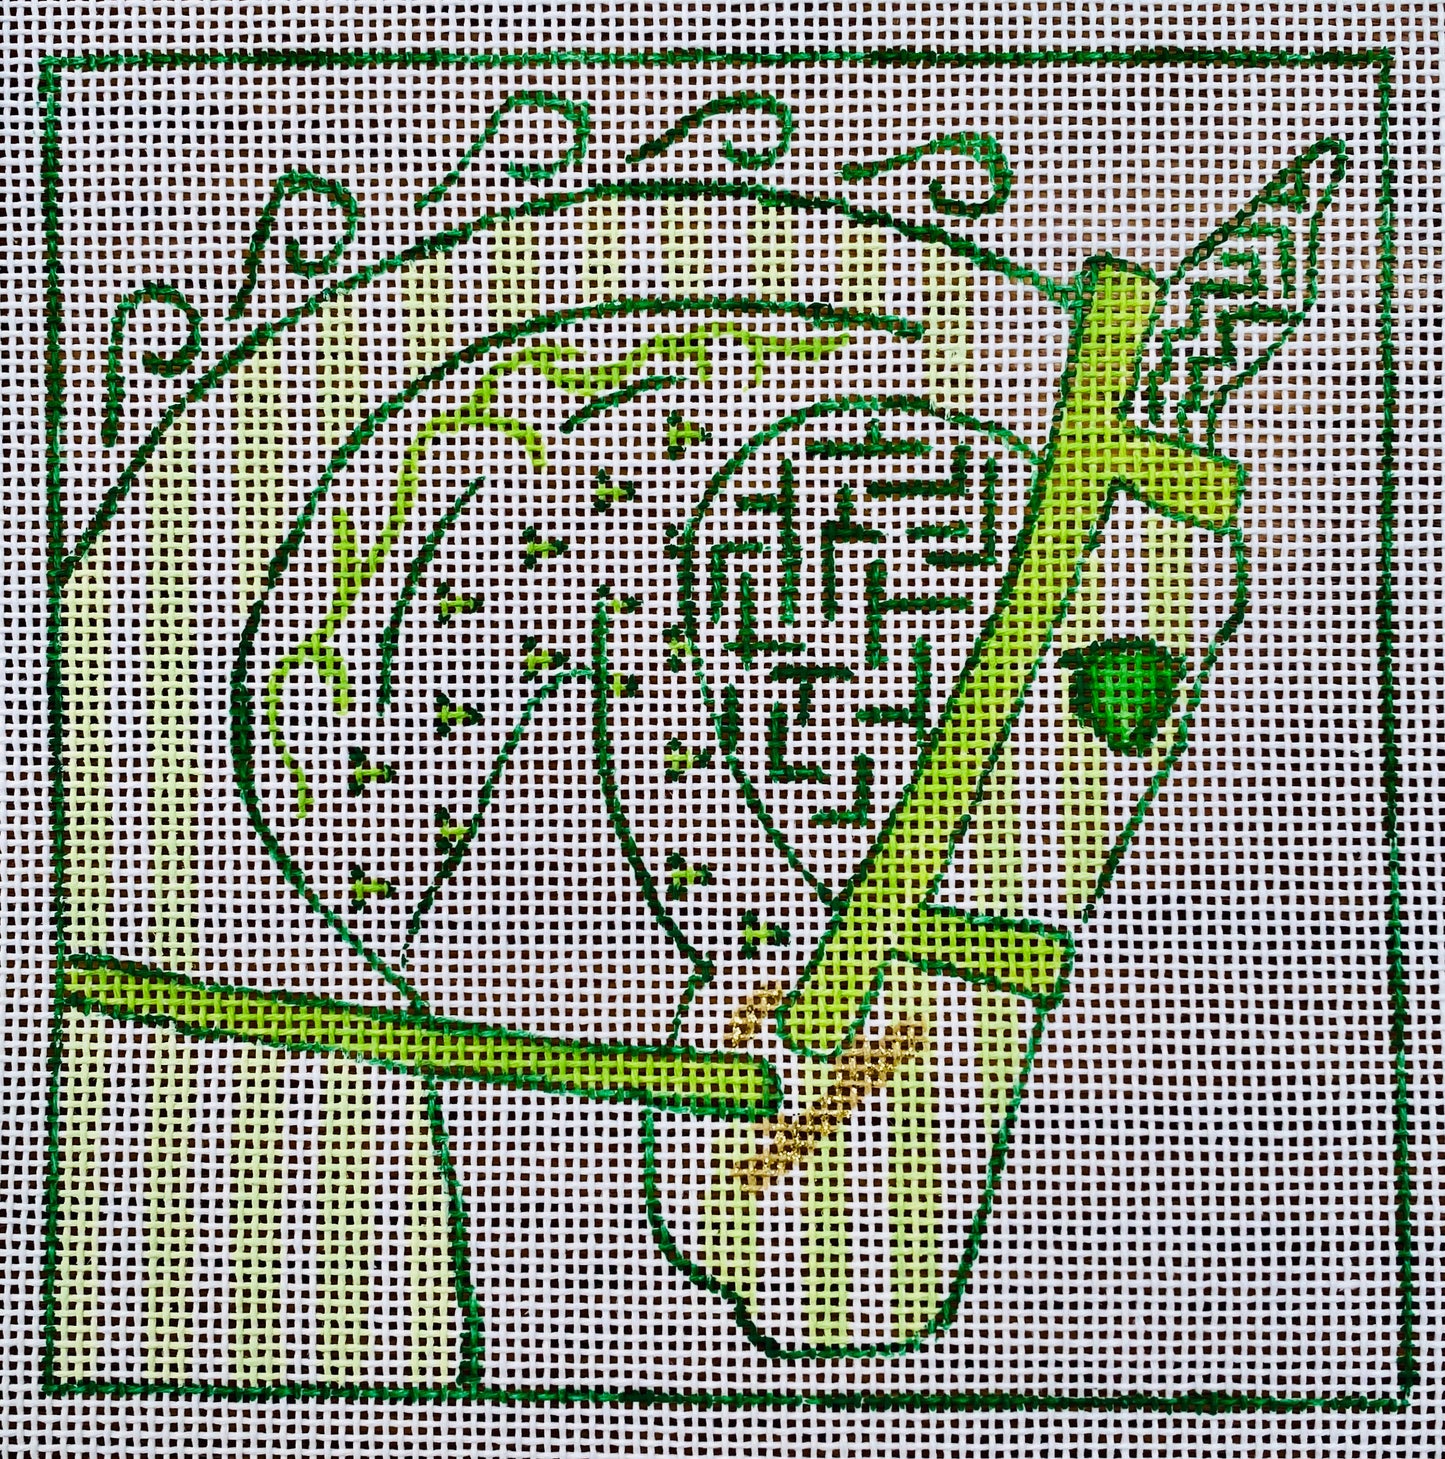 "PORCELAIN HORSE HEAD IN GREENS",  5.25" square on 18 mesh